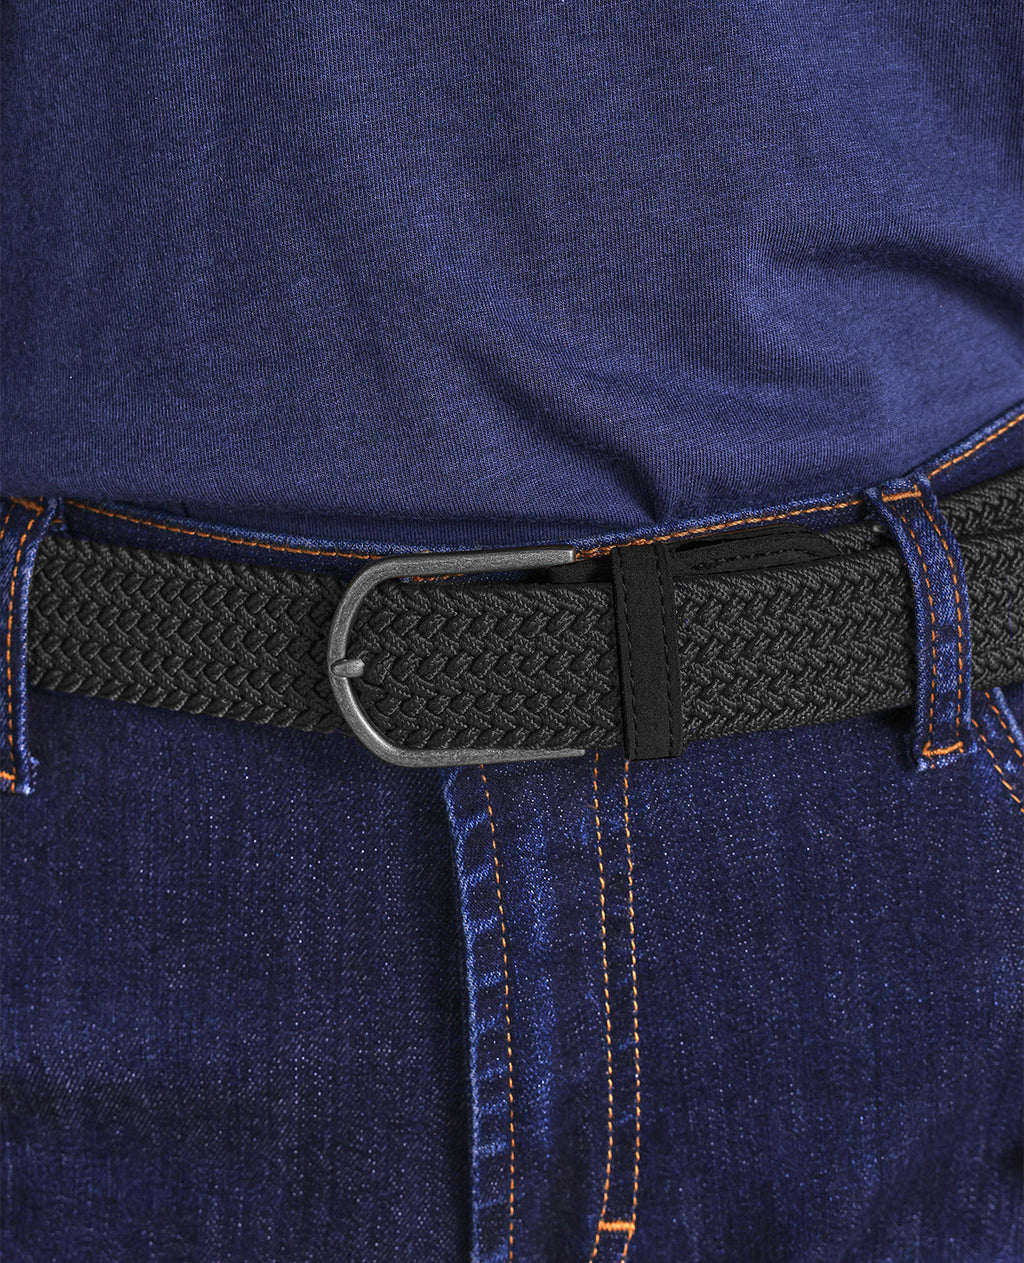 The Voyager - Woven Stretch Belt w/Suede Trim - Charcoal